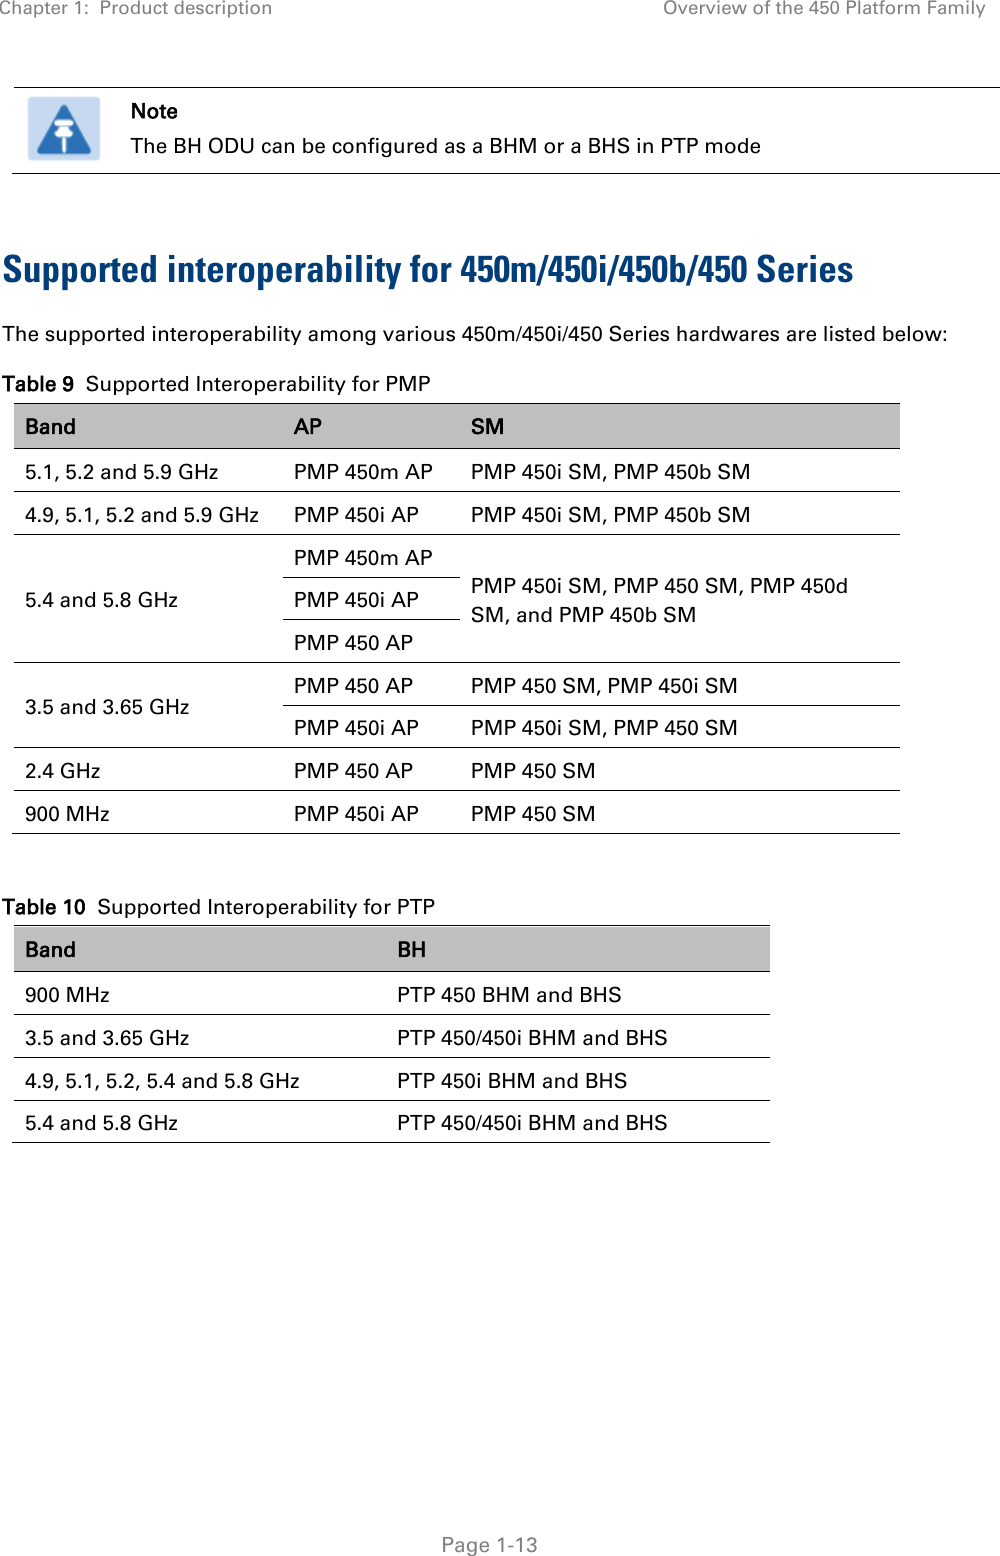 Chapter 1:  Product description Overview of the 450 Platform Family   Page 1-13  Note The BH ODU can be configured as a BHM or a BHS in PTP mode  Supported interoperability for 450m/450i/450b/450 Series  The supported interoperability among various 450m/450i/450 Series hardwares are listed below: Table 9  Supported Interoperability for PMP Band AP  SM 5.1, 5.2 and 5.9 GHz  PMP 450m AP PMP 450i SM, PMP 450b SM  4.9, 5.1, 5.2 and 5.9 GHz  PMP 450i AP PMP 450i SM, PMP 450b SM  5.4 and 5.8 GHz PMP 450m AP PMP 450i SM, PMP 450 SM, PMP 450d SM, and PMP 450b SM  PMP 450i AP PMP 450 AP 3.5 and 3.65 GHz PMP 450 AP PMP 450 SM, PMP 450i SM PMP 450i AP PMP 450i SM, PMP 450 SM 2.4 GHz  PMP 450 AP PMP 450 SM 900 MHz PMP 450i AP PMP 450 SM  Table 10  Supported Interoperability for PTP Band BH 900 MHz PTP 450 BHM and BHS 3.5 and 3.65 GHz PTP 450/450i BHM and BHS 4.9, 5.1, 5.2, 5.4 and 5.8 GHz  PTP 450i BHM and BHS 5.4 and 5.8 GHz  PTP 450/450i BHM and BHS     